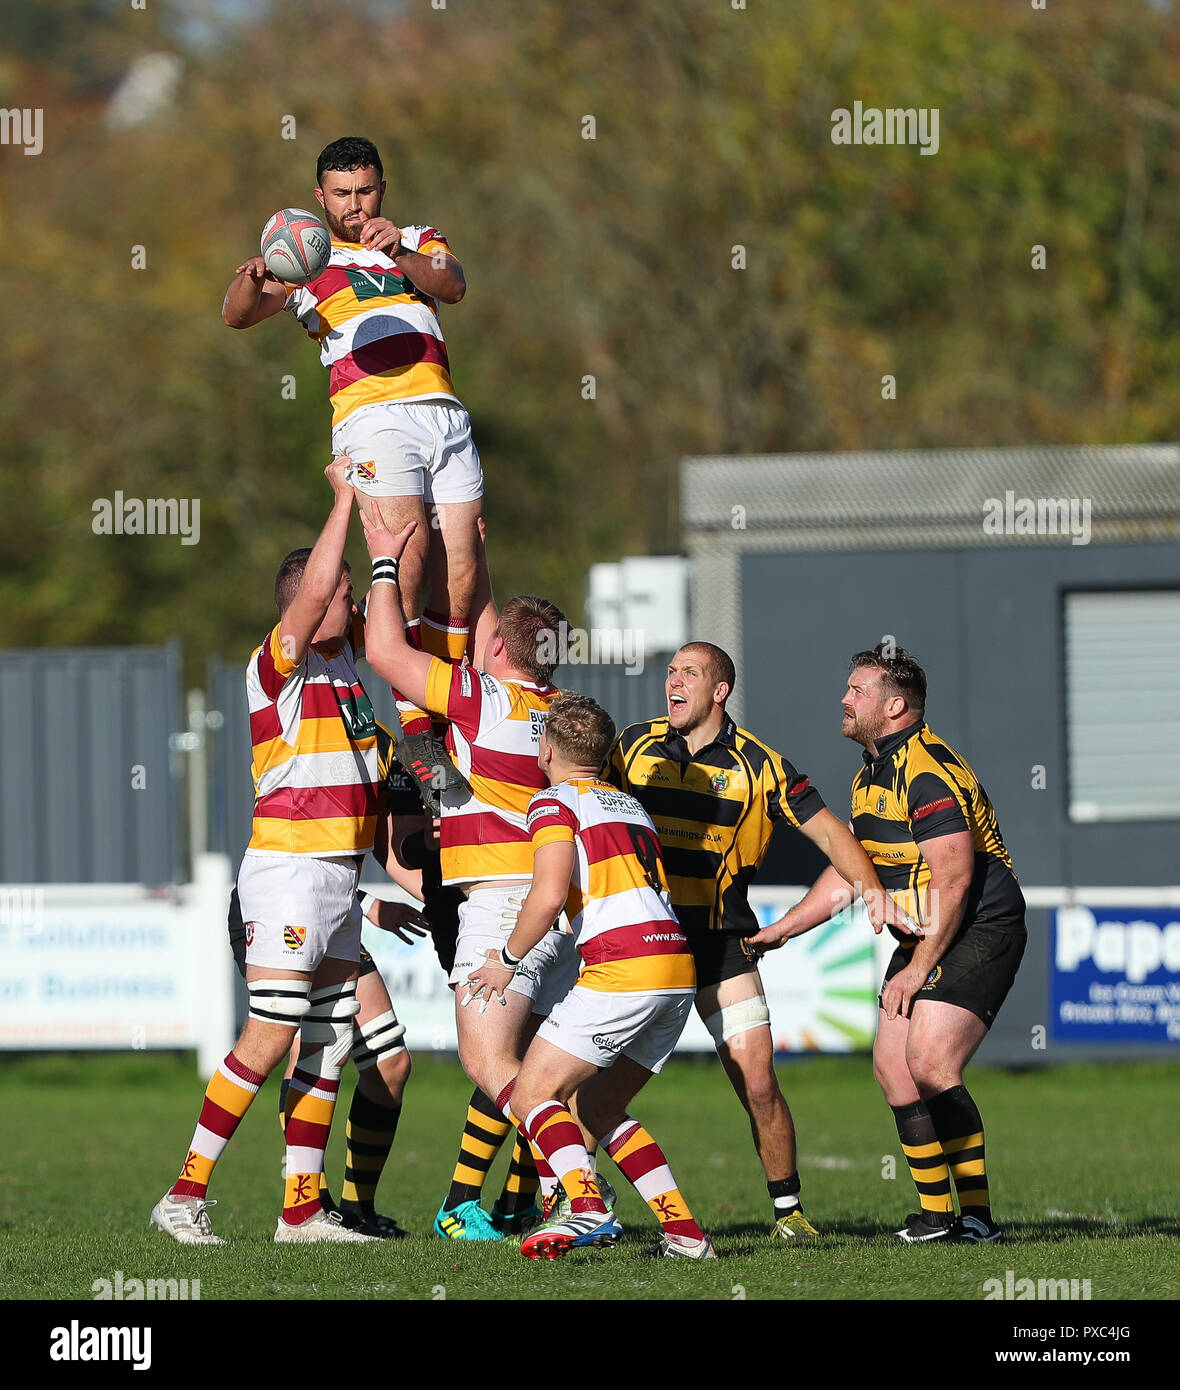 20.10.2018 Hinckley, Leicester, England. Rugby Union, Hinckley rfc v Fylde rfc.   Ben OÕRyan  throws into the line-out for Fylde during the RFU National League 2 North (NL2N) game played at the Leicester  Road Stadium.    © Phil Hutchinson / Alamy Live News Stock Photo